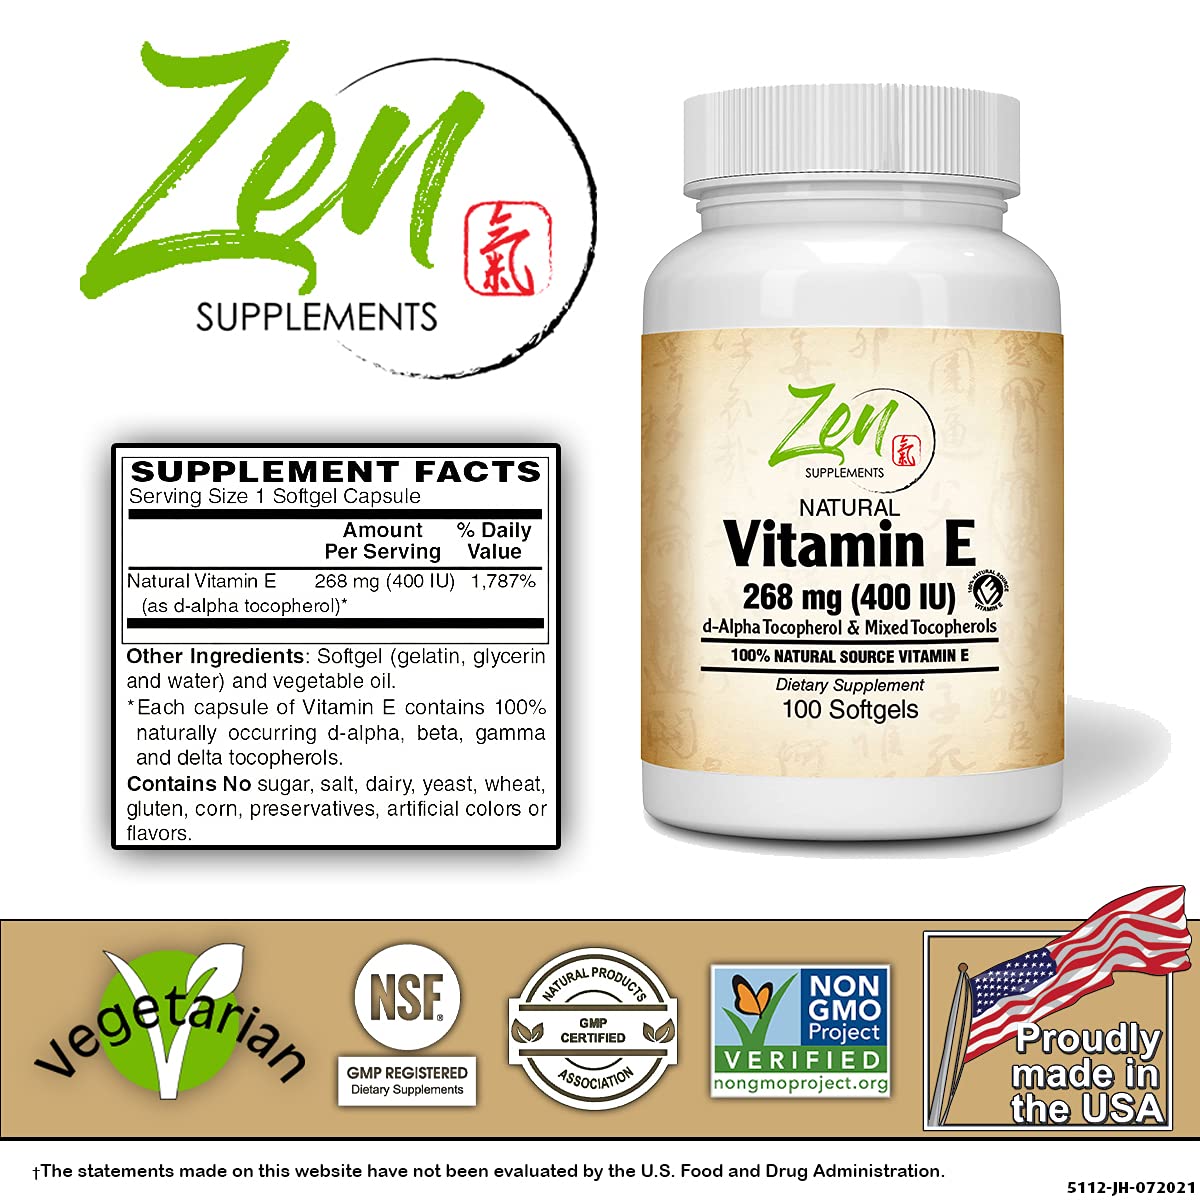 Zen Supplements - Vitamin E-400 Mixed Tocopherols - Supports Overall Wellness & Immune Function, Promotes Beautiful Hair & Skin 100-Softgel